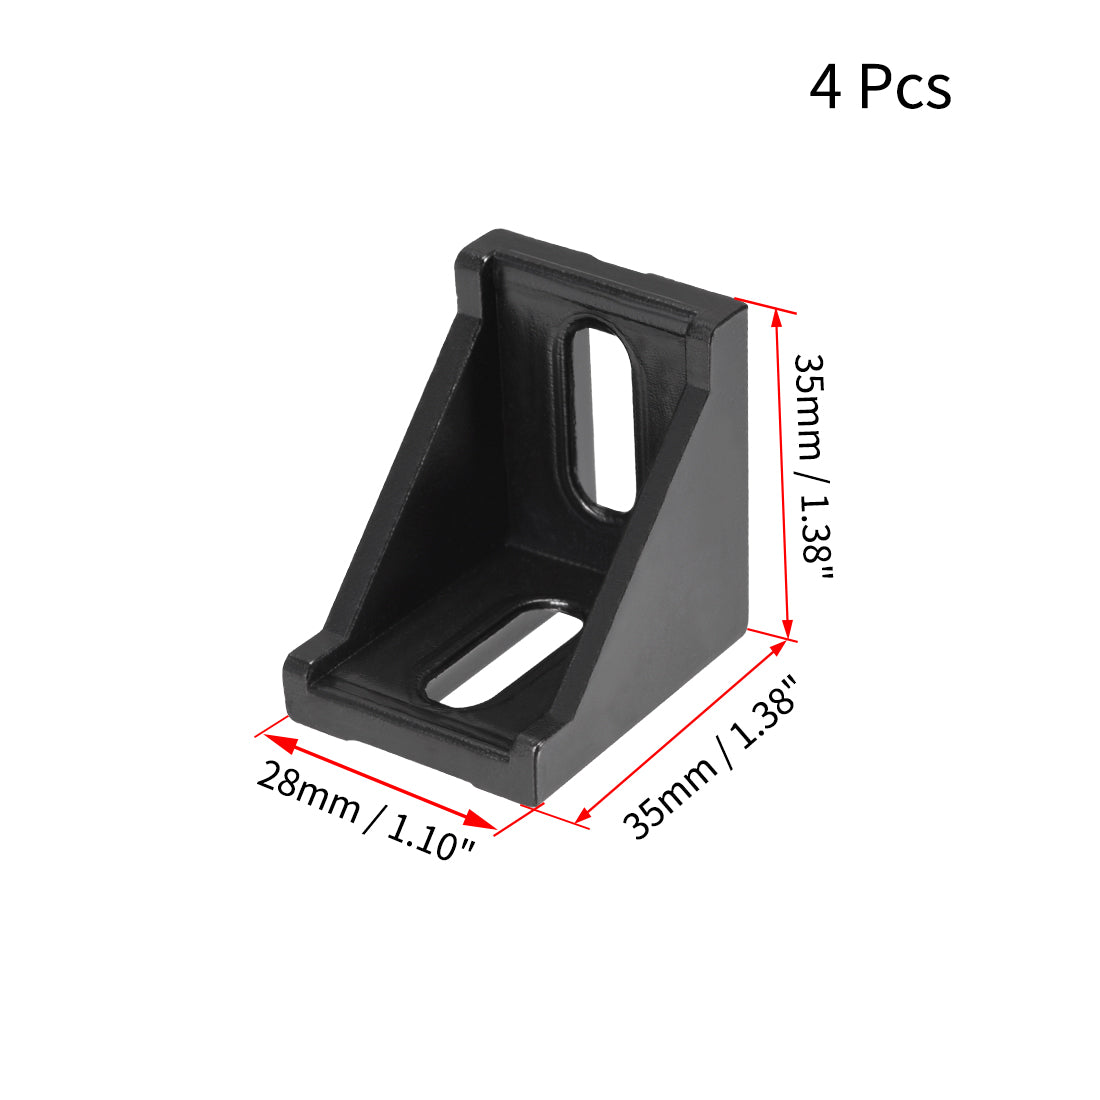 uxcell Uxcell Inside Corner Bracket Gusset, 35mm x 35mm for 3030 Series Aluminum Extrusion Profile with Slot 8mm, 4 Pcs (Black)